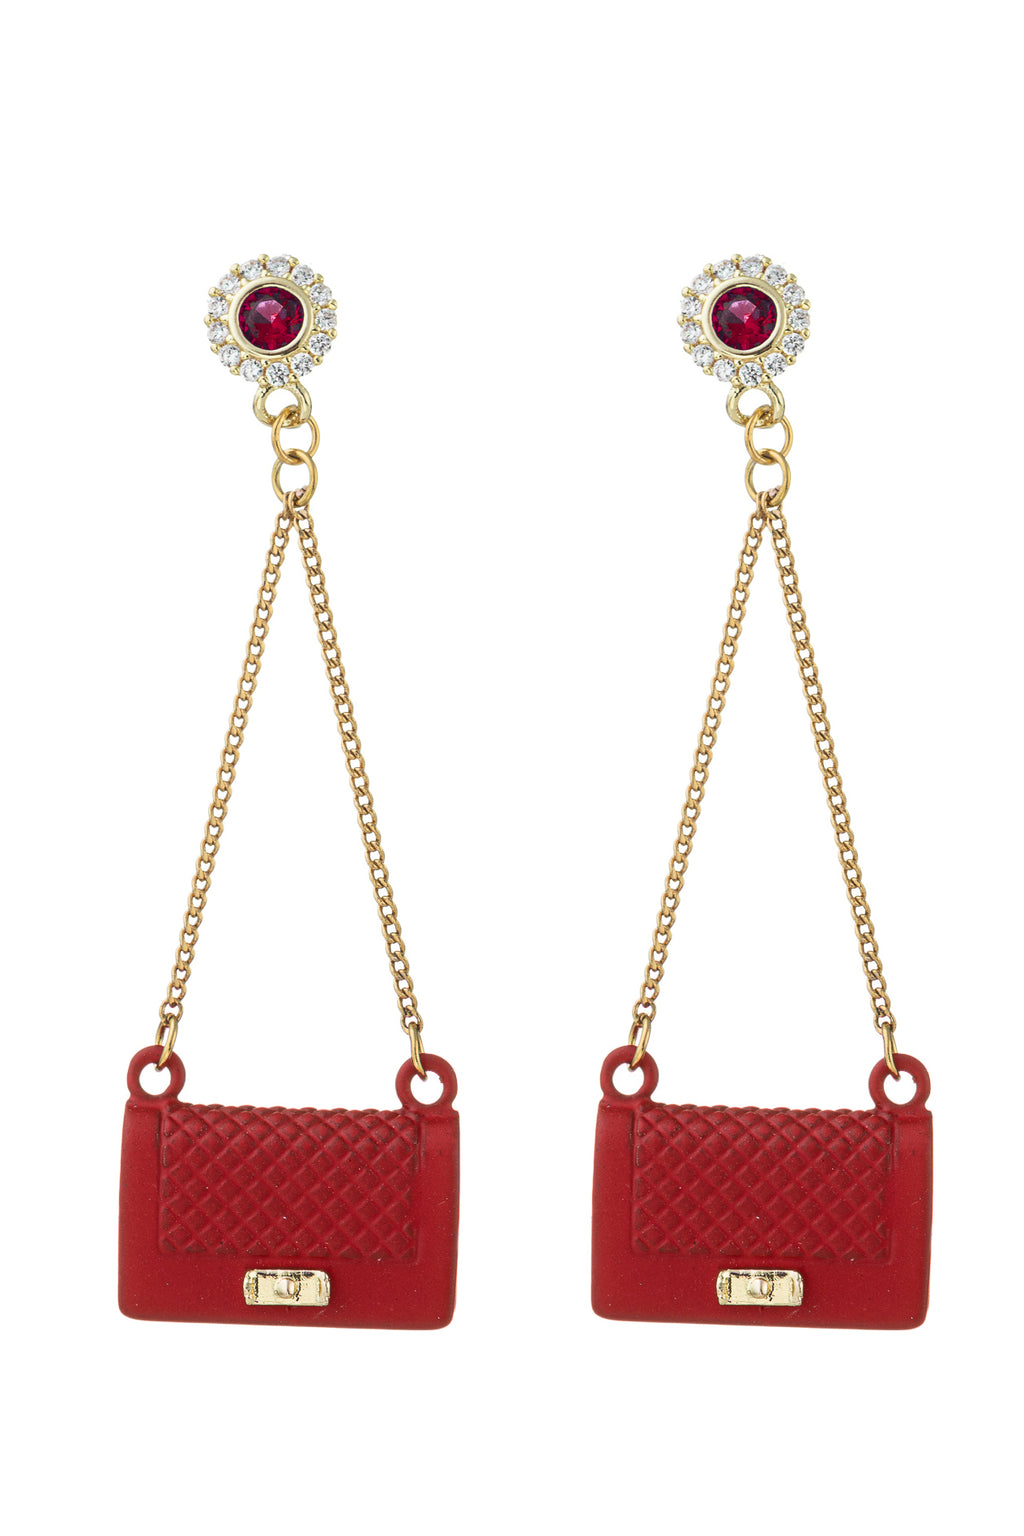 Red purse 18k gold plated dangle drop earrings studded with CZ crystals.